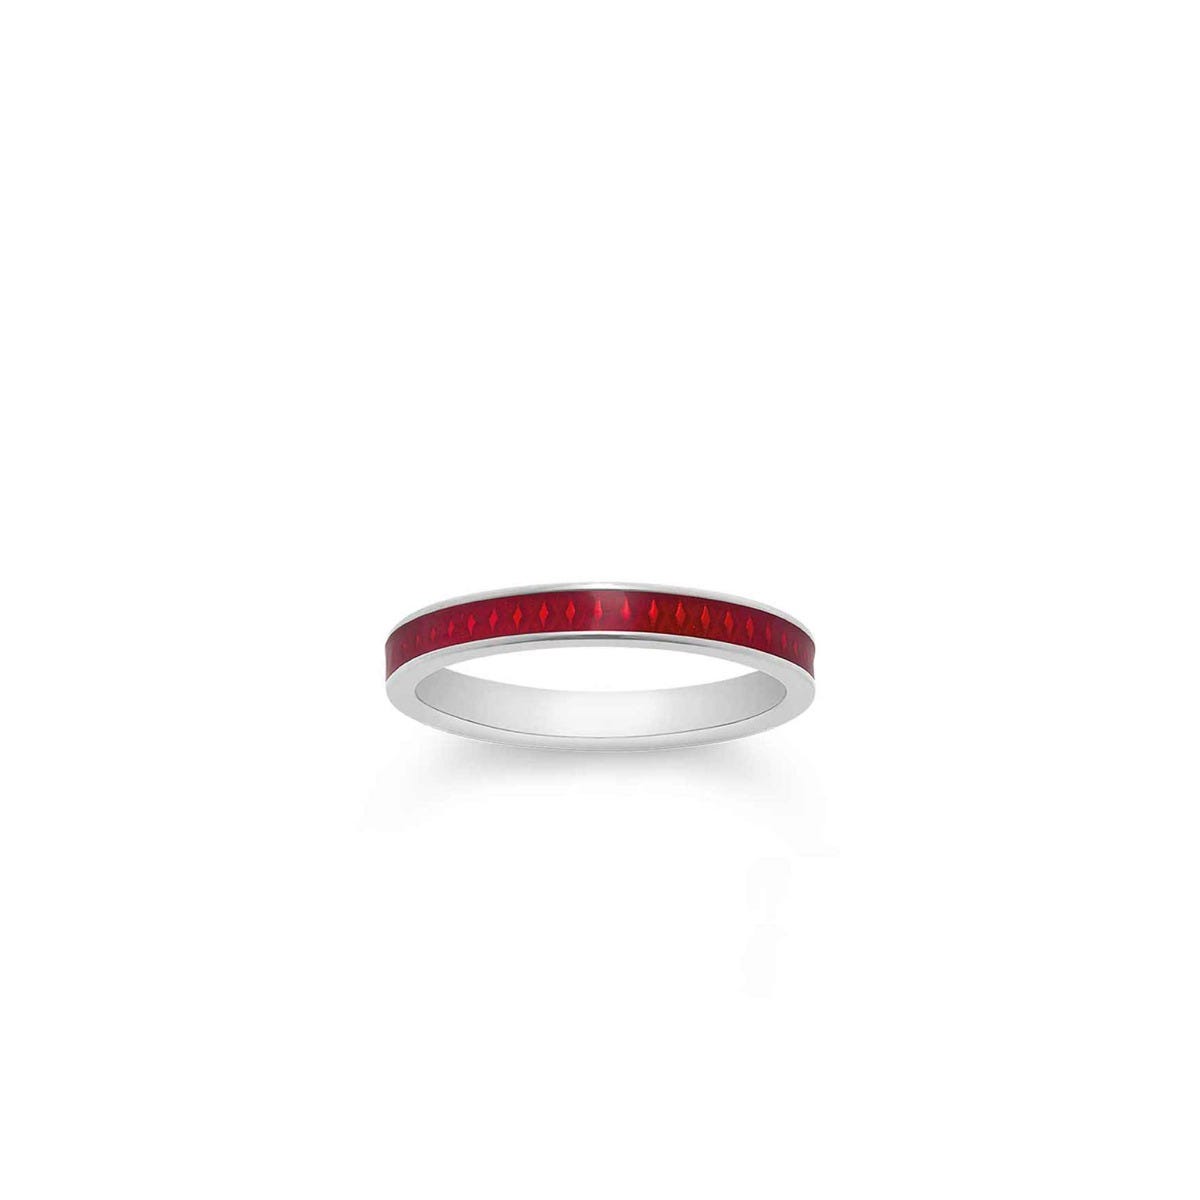 167 Ring with Red Enamel in 18ct White Gold